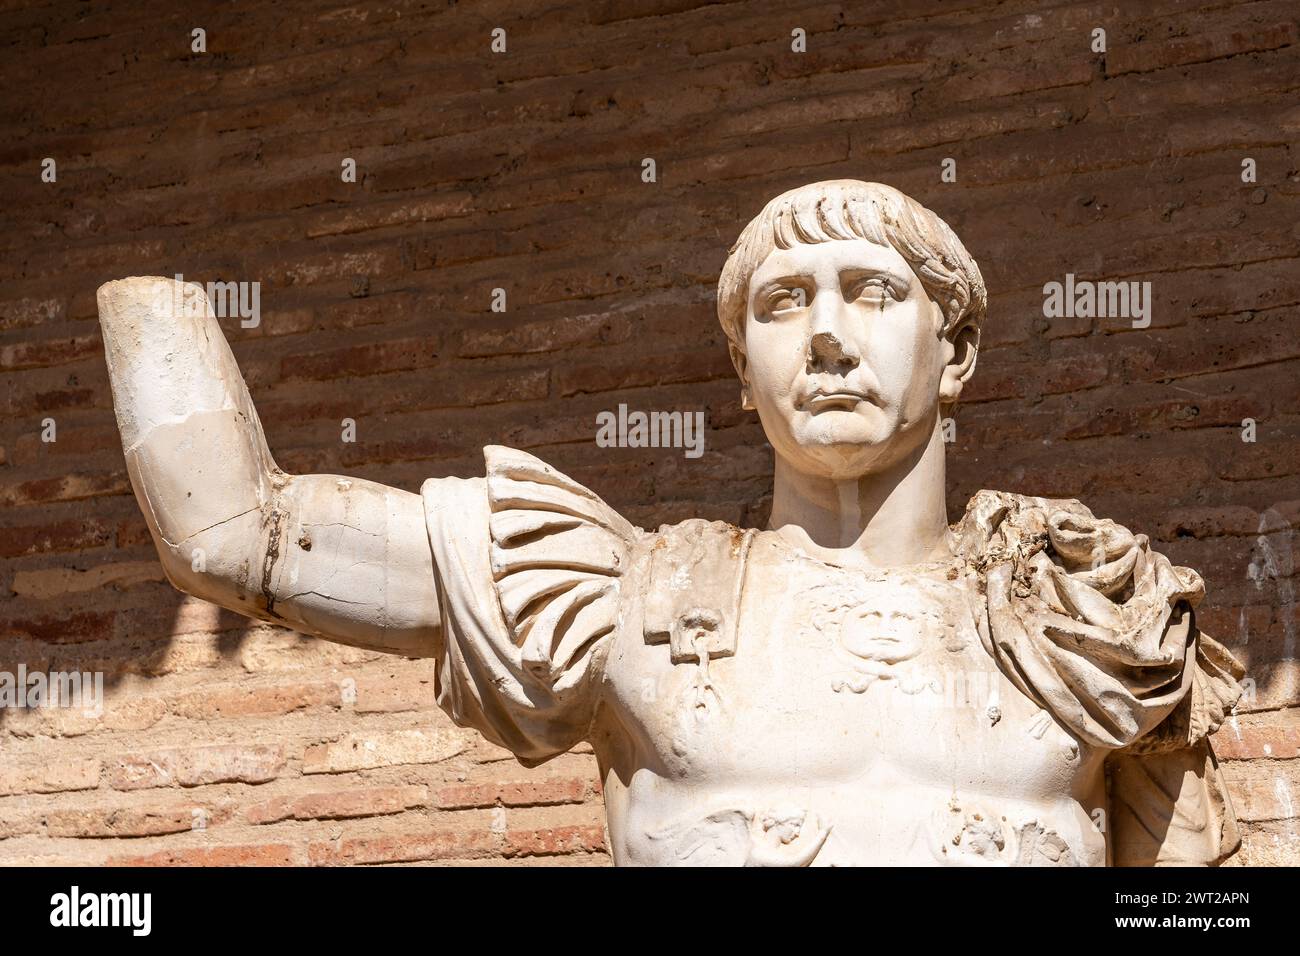 Close-up on face of statue in ruins portraiting an ancient roman general Stock Photo